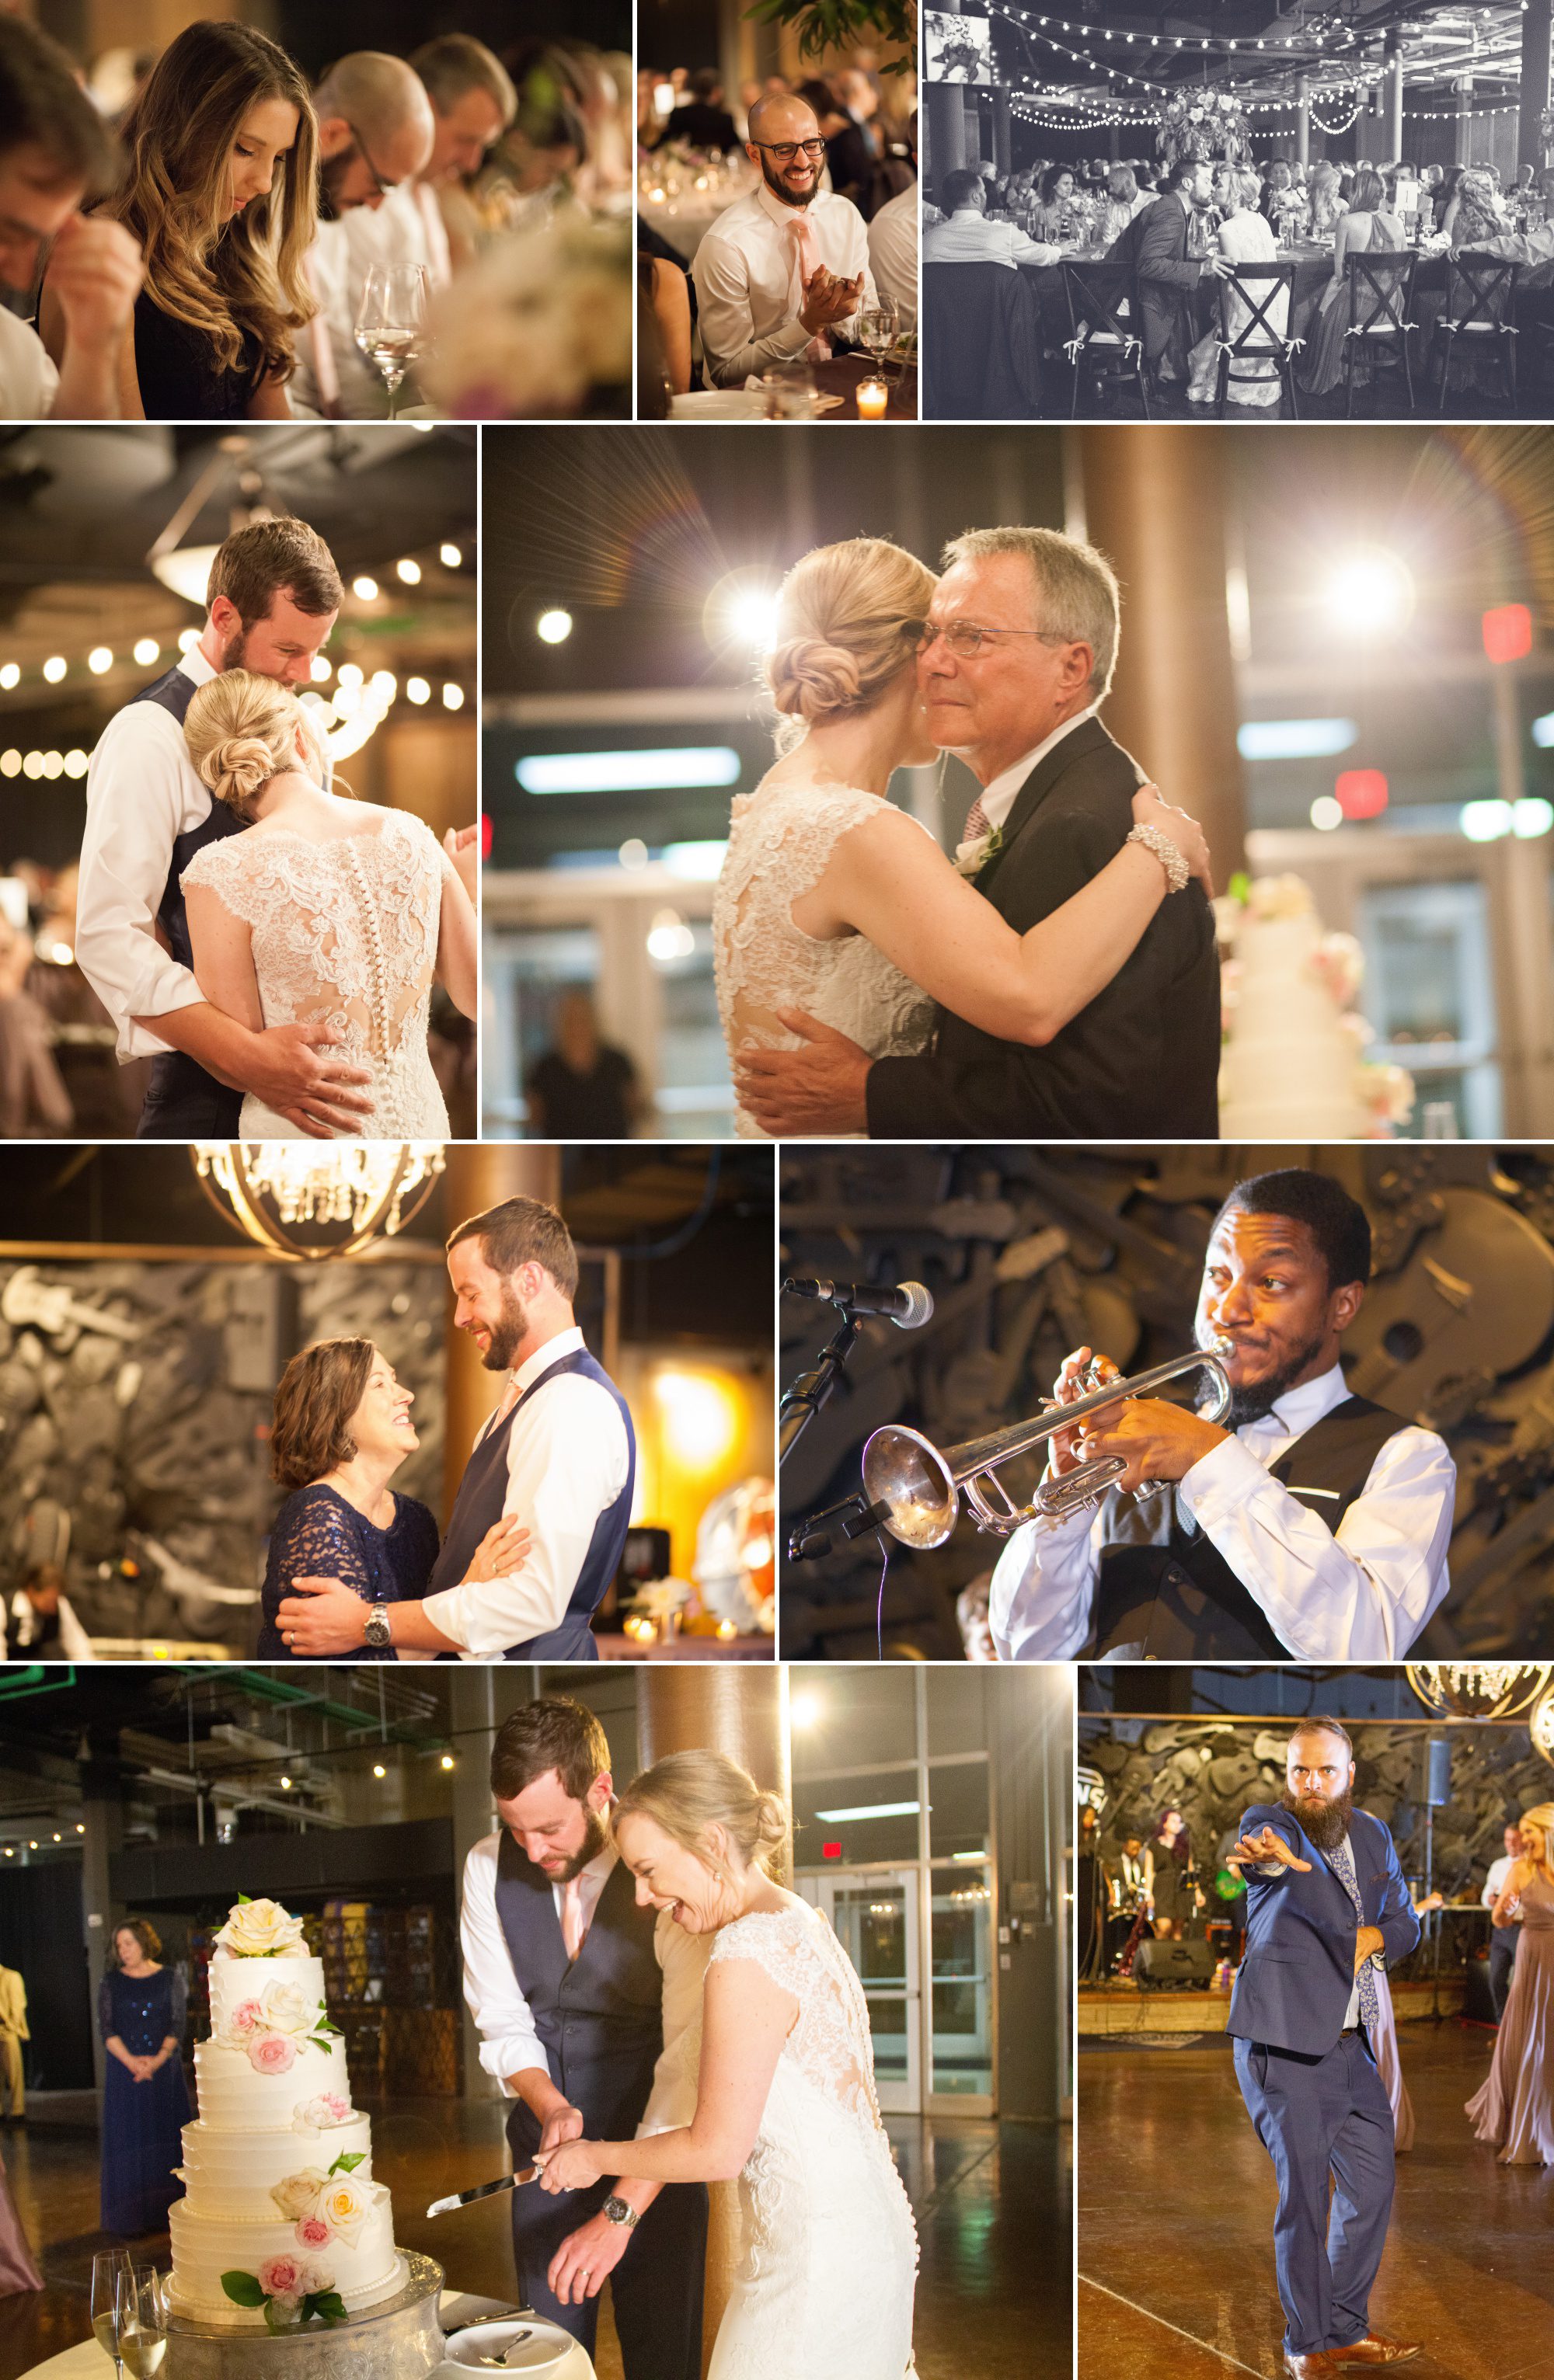 Guests enjoy dinner and dancing at wedding reception after wedding photography at Musicians Hall of Fame in Nashville TN photos by Krista Lee 